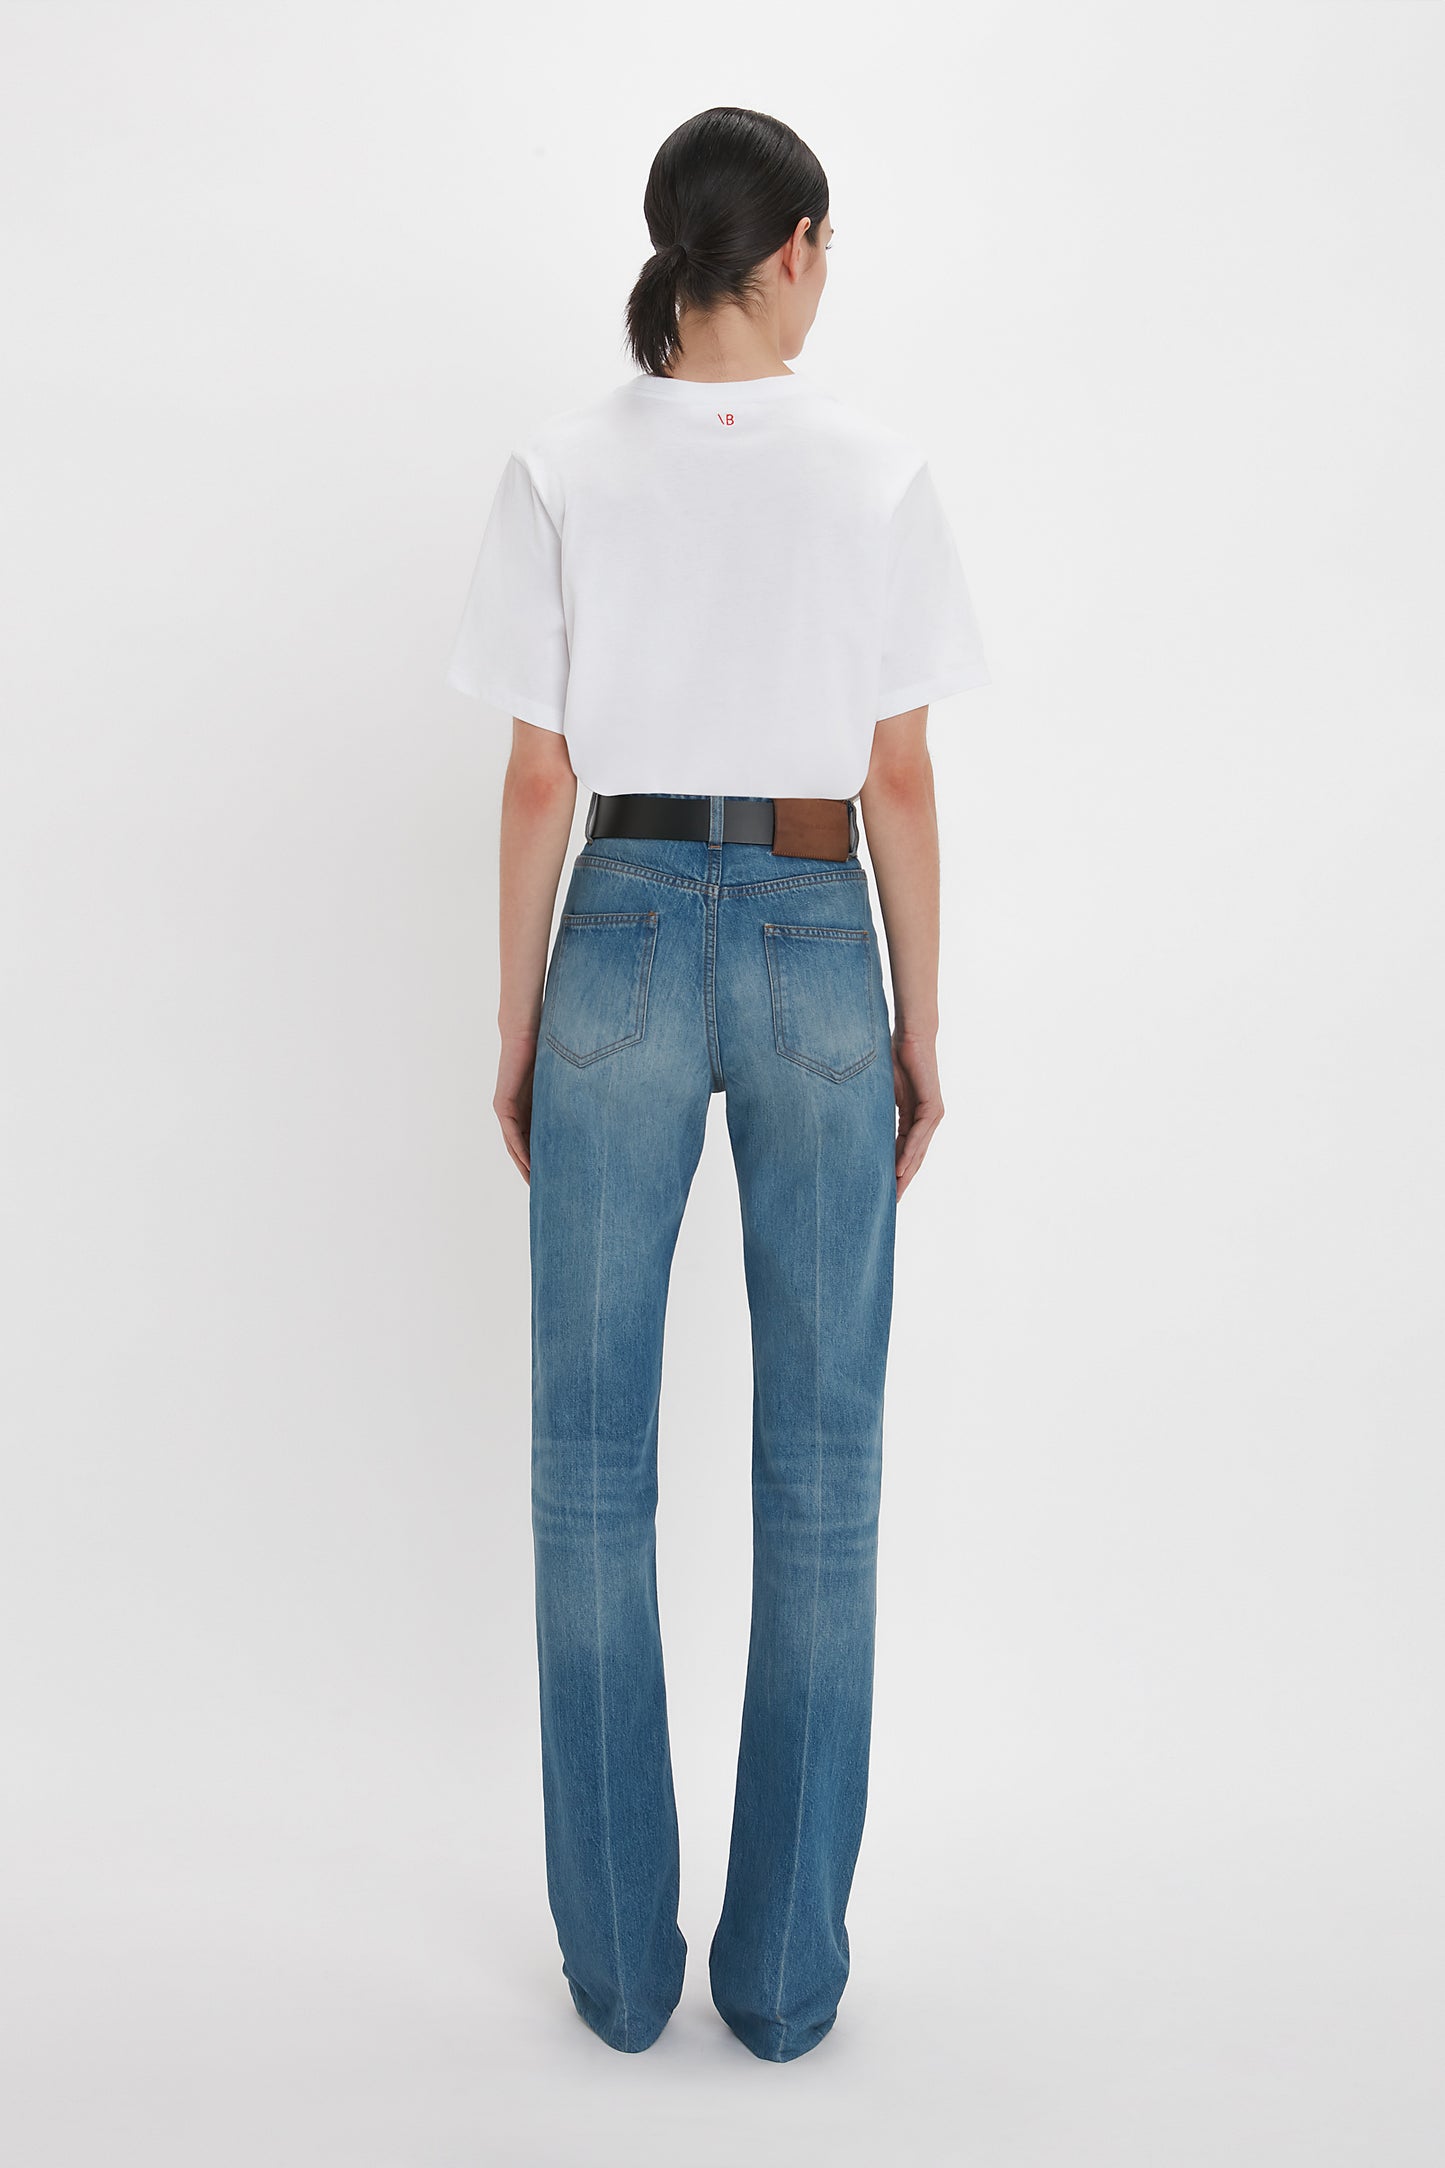 A person with dark hair is seen from the back, wearing a white short-sleeve shirt and blue distressed Julia Jean In Broken Vintage Wash by Victoria Beckham made from 100% cotton denim. They are standing against a plain white background.